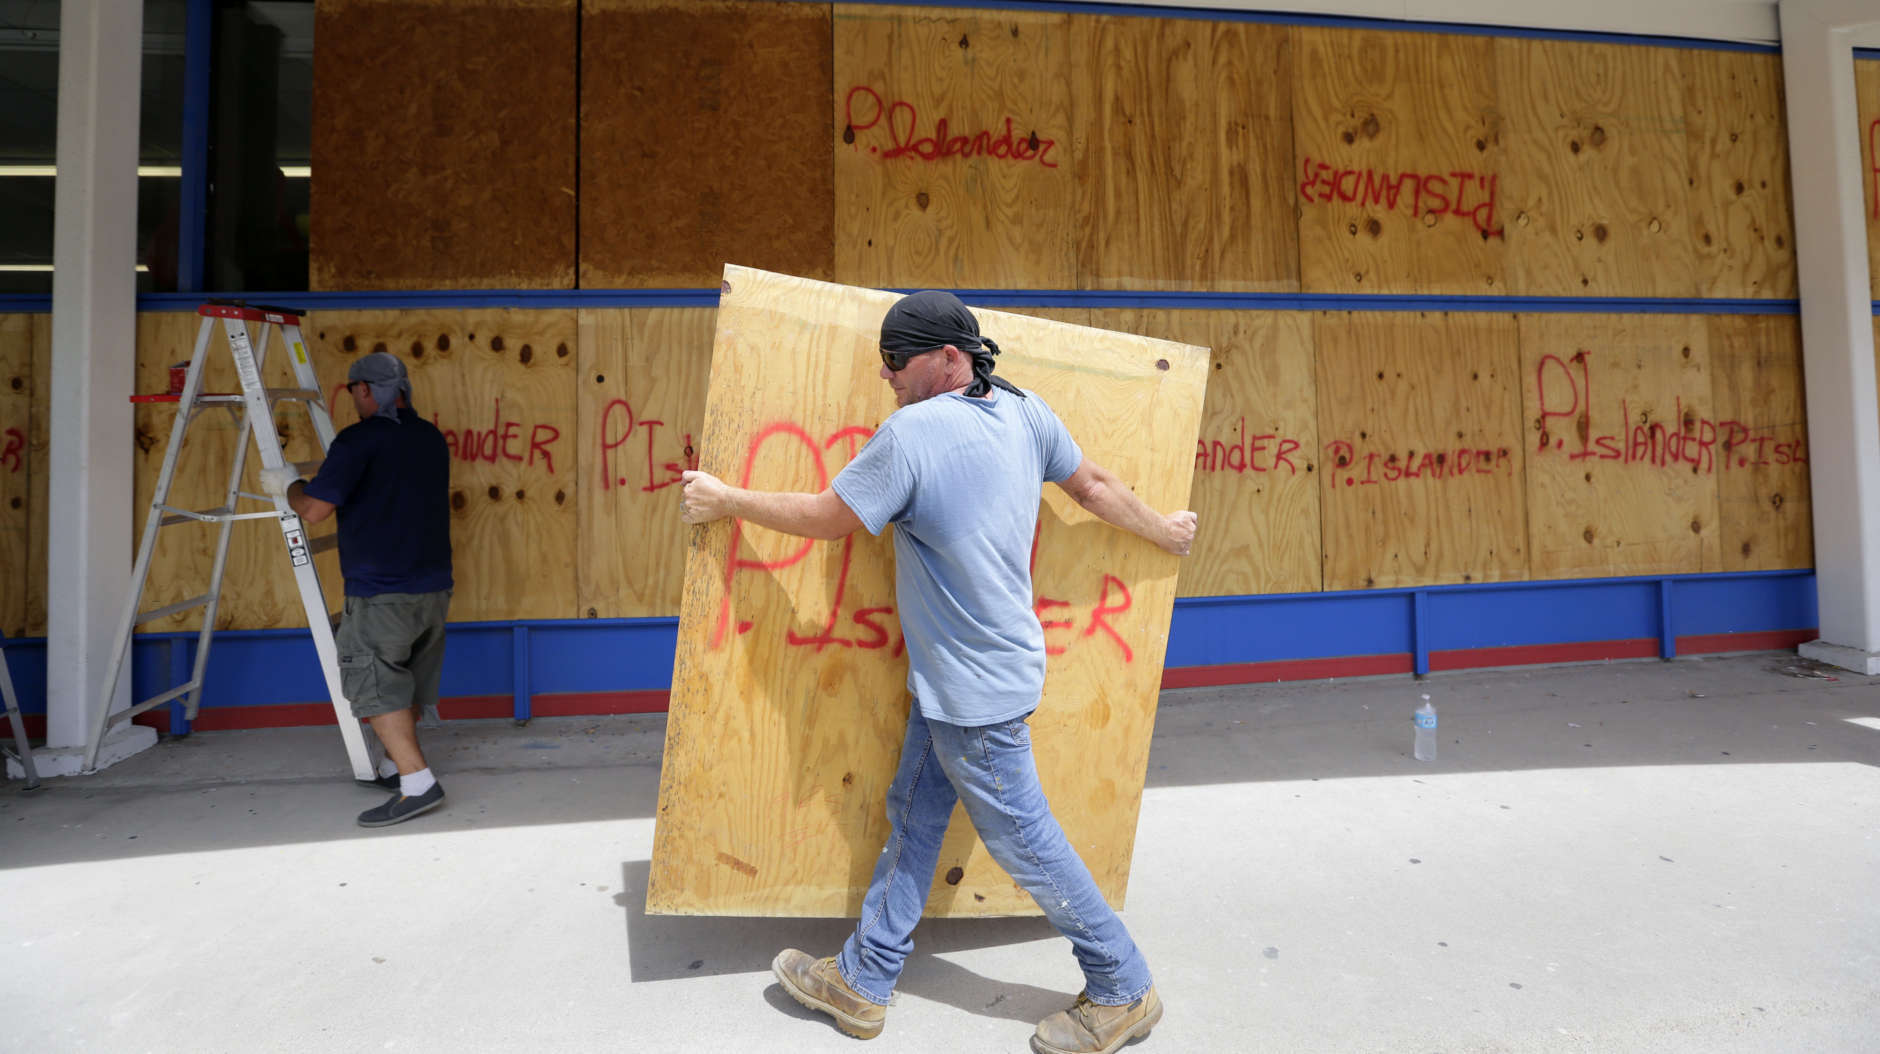 James Redford carries a sheet of plywood as he helps board up windows in preparation for Hurricane Harvey, Thursday, Aug. 24, 2017, in Corpus Christi, Texas. (AP Photo/Eric Gay)